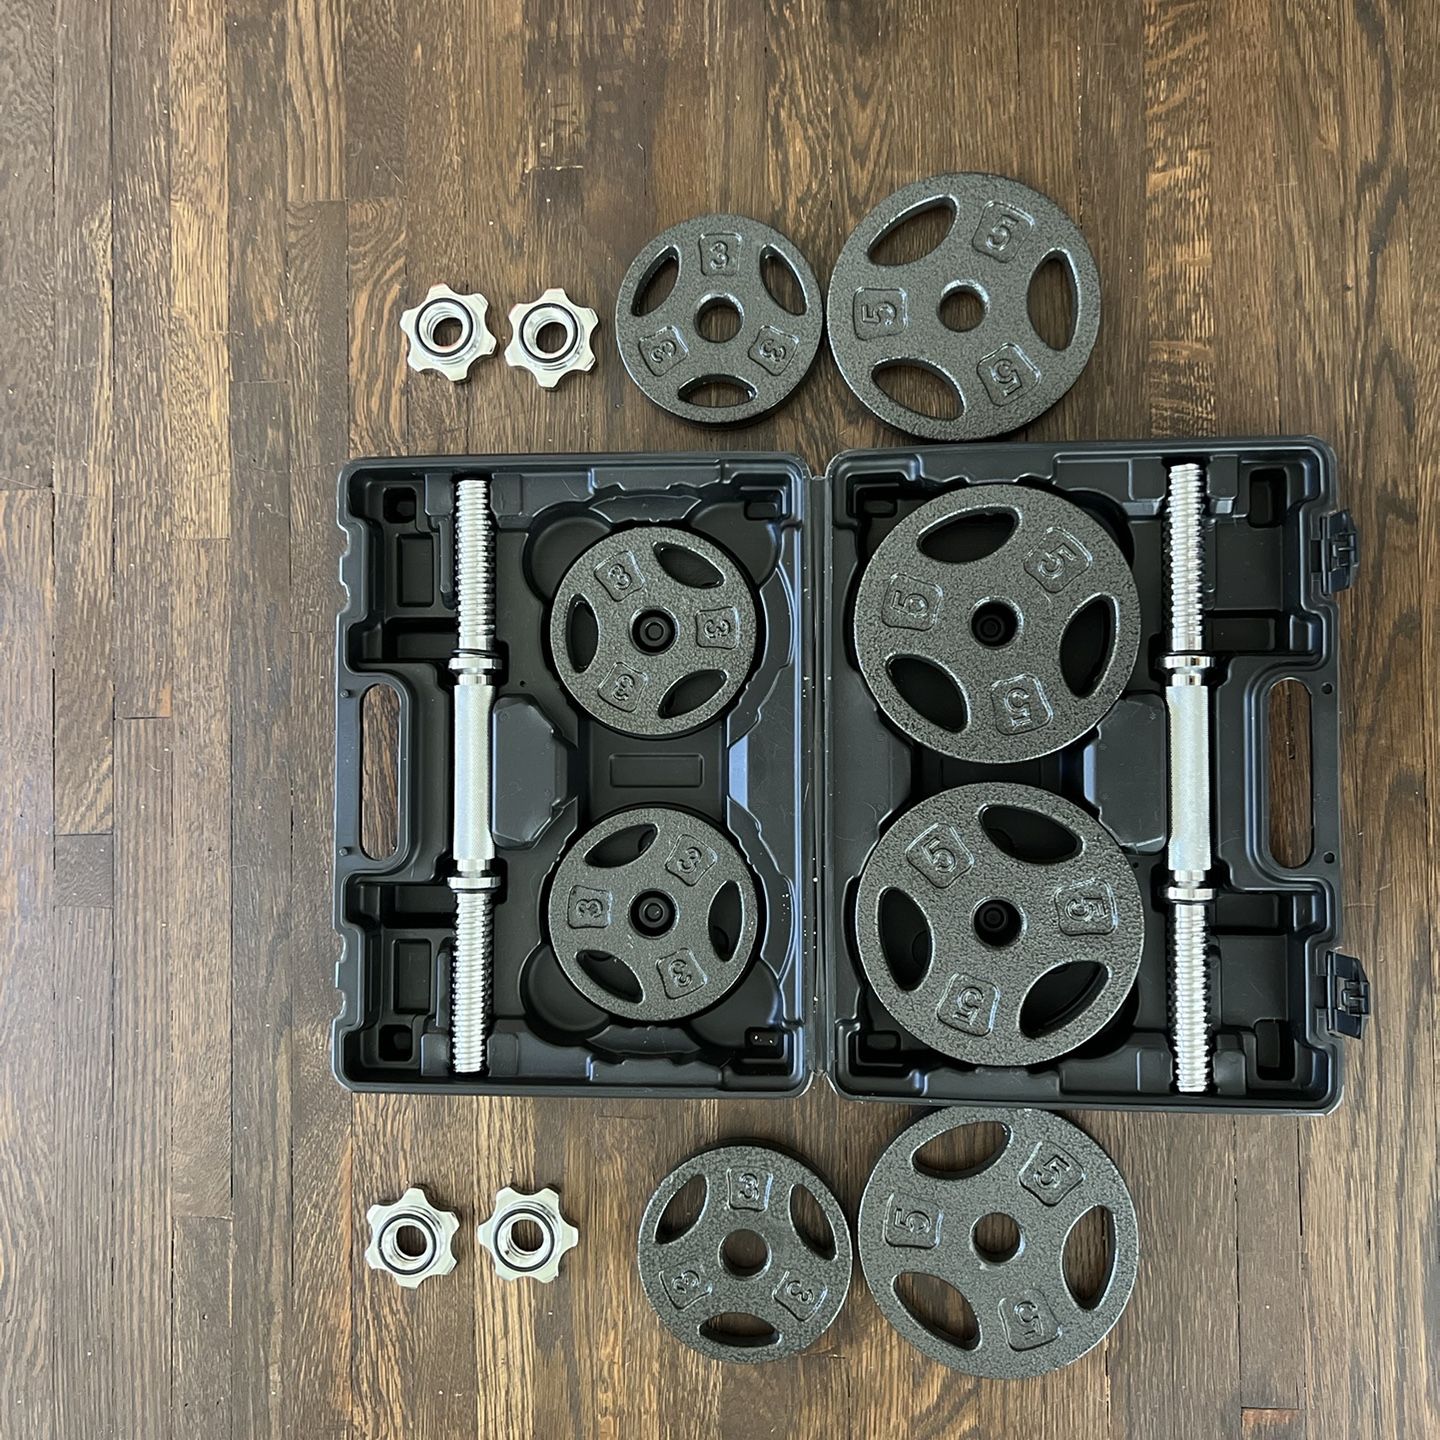 Like New Adjustable Cast Iron Dumbbell Weight Set - $60 (MSRP $80)